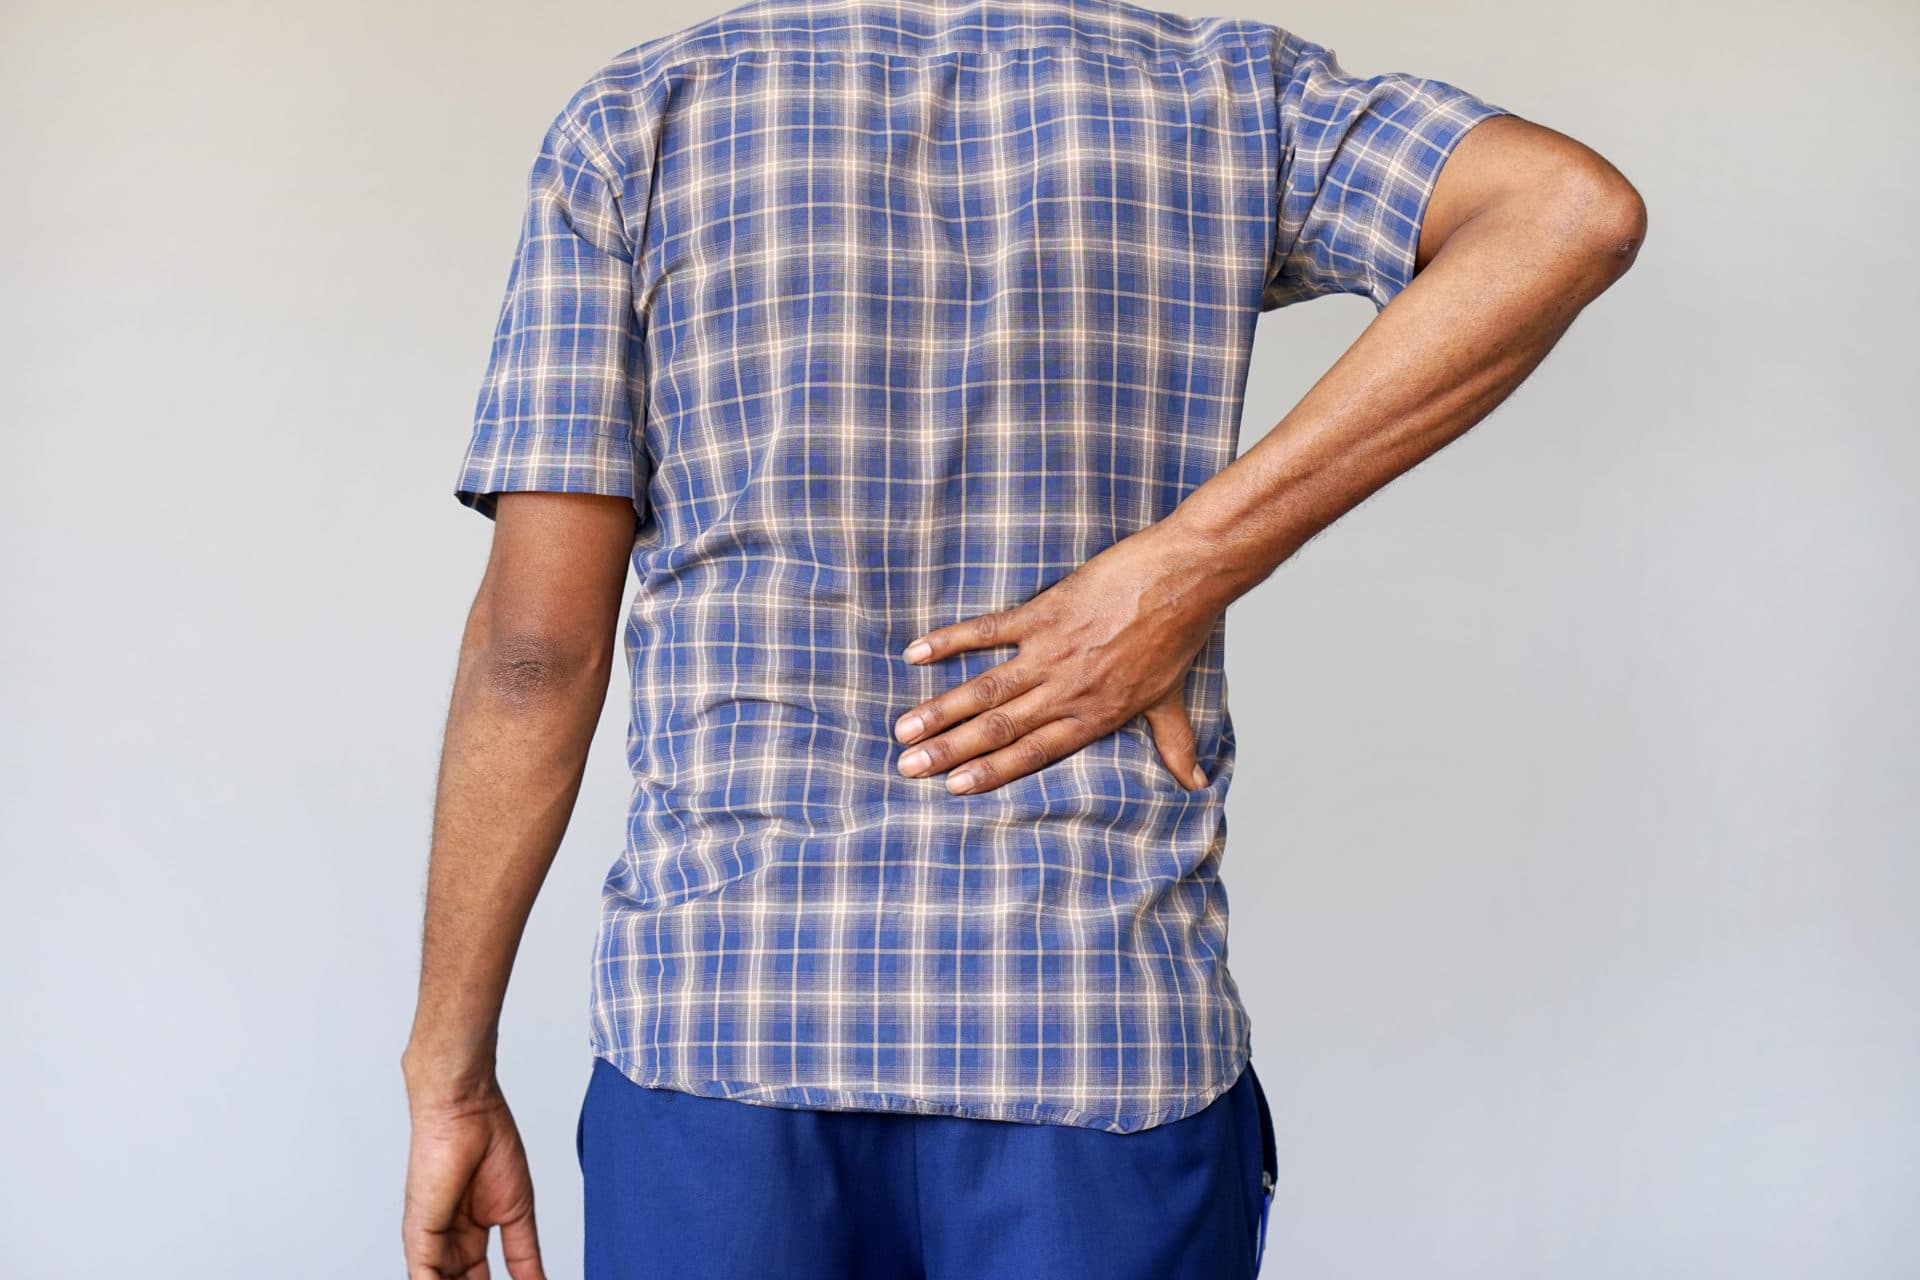 Treatment for Facet Joint Pain - Featured Image